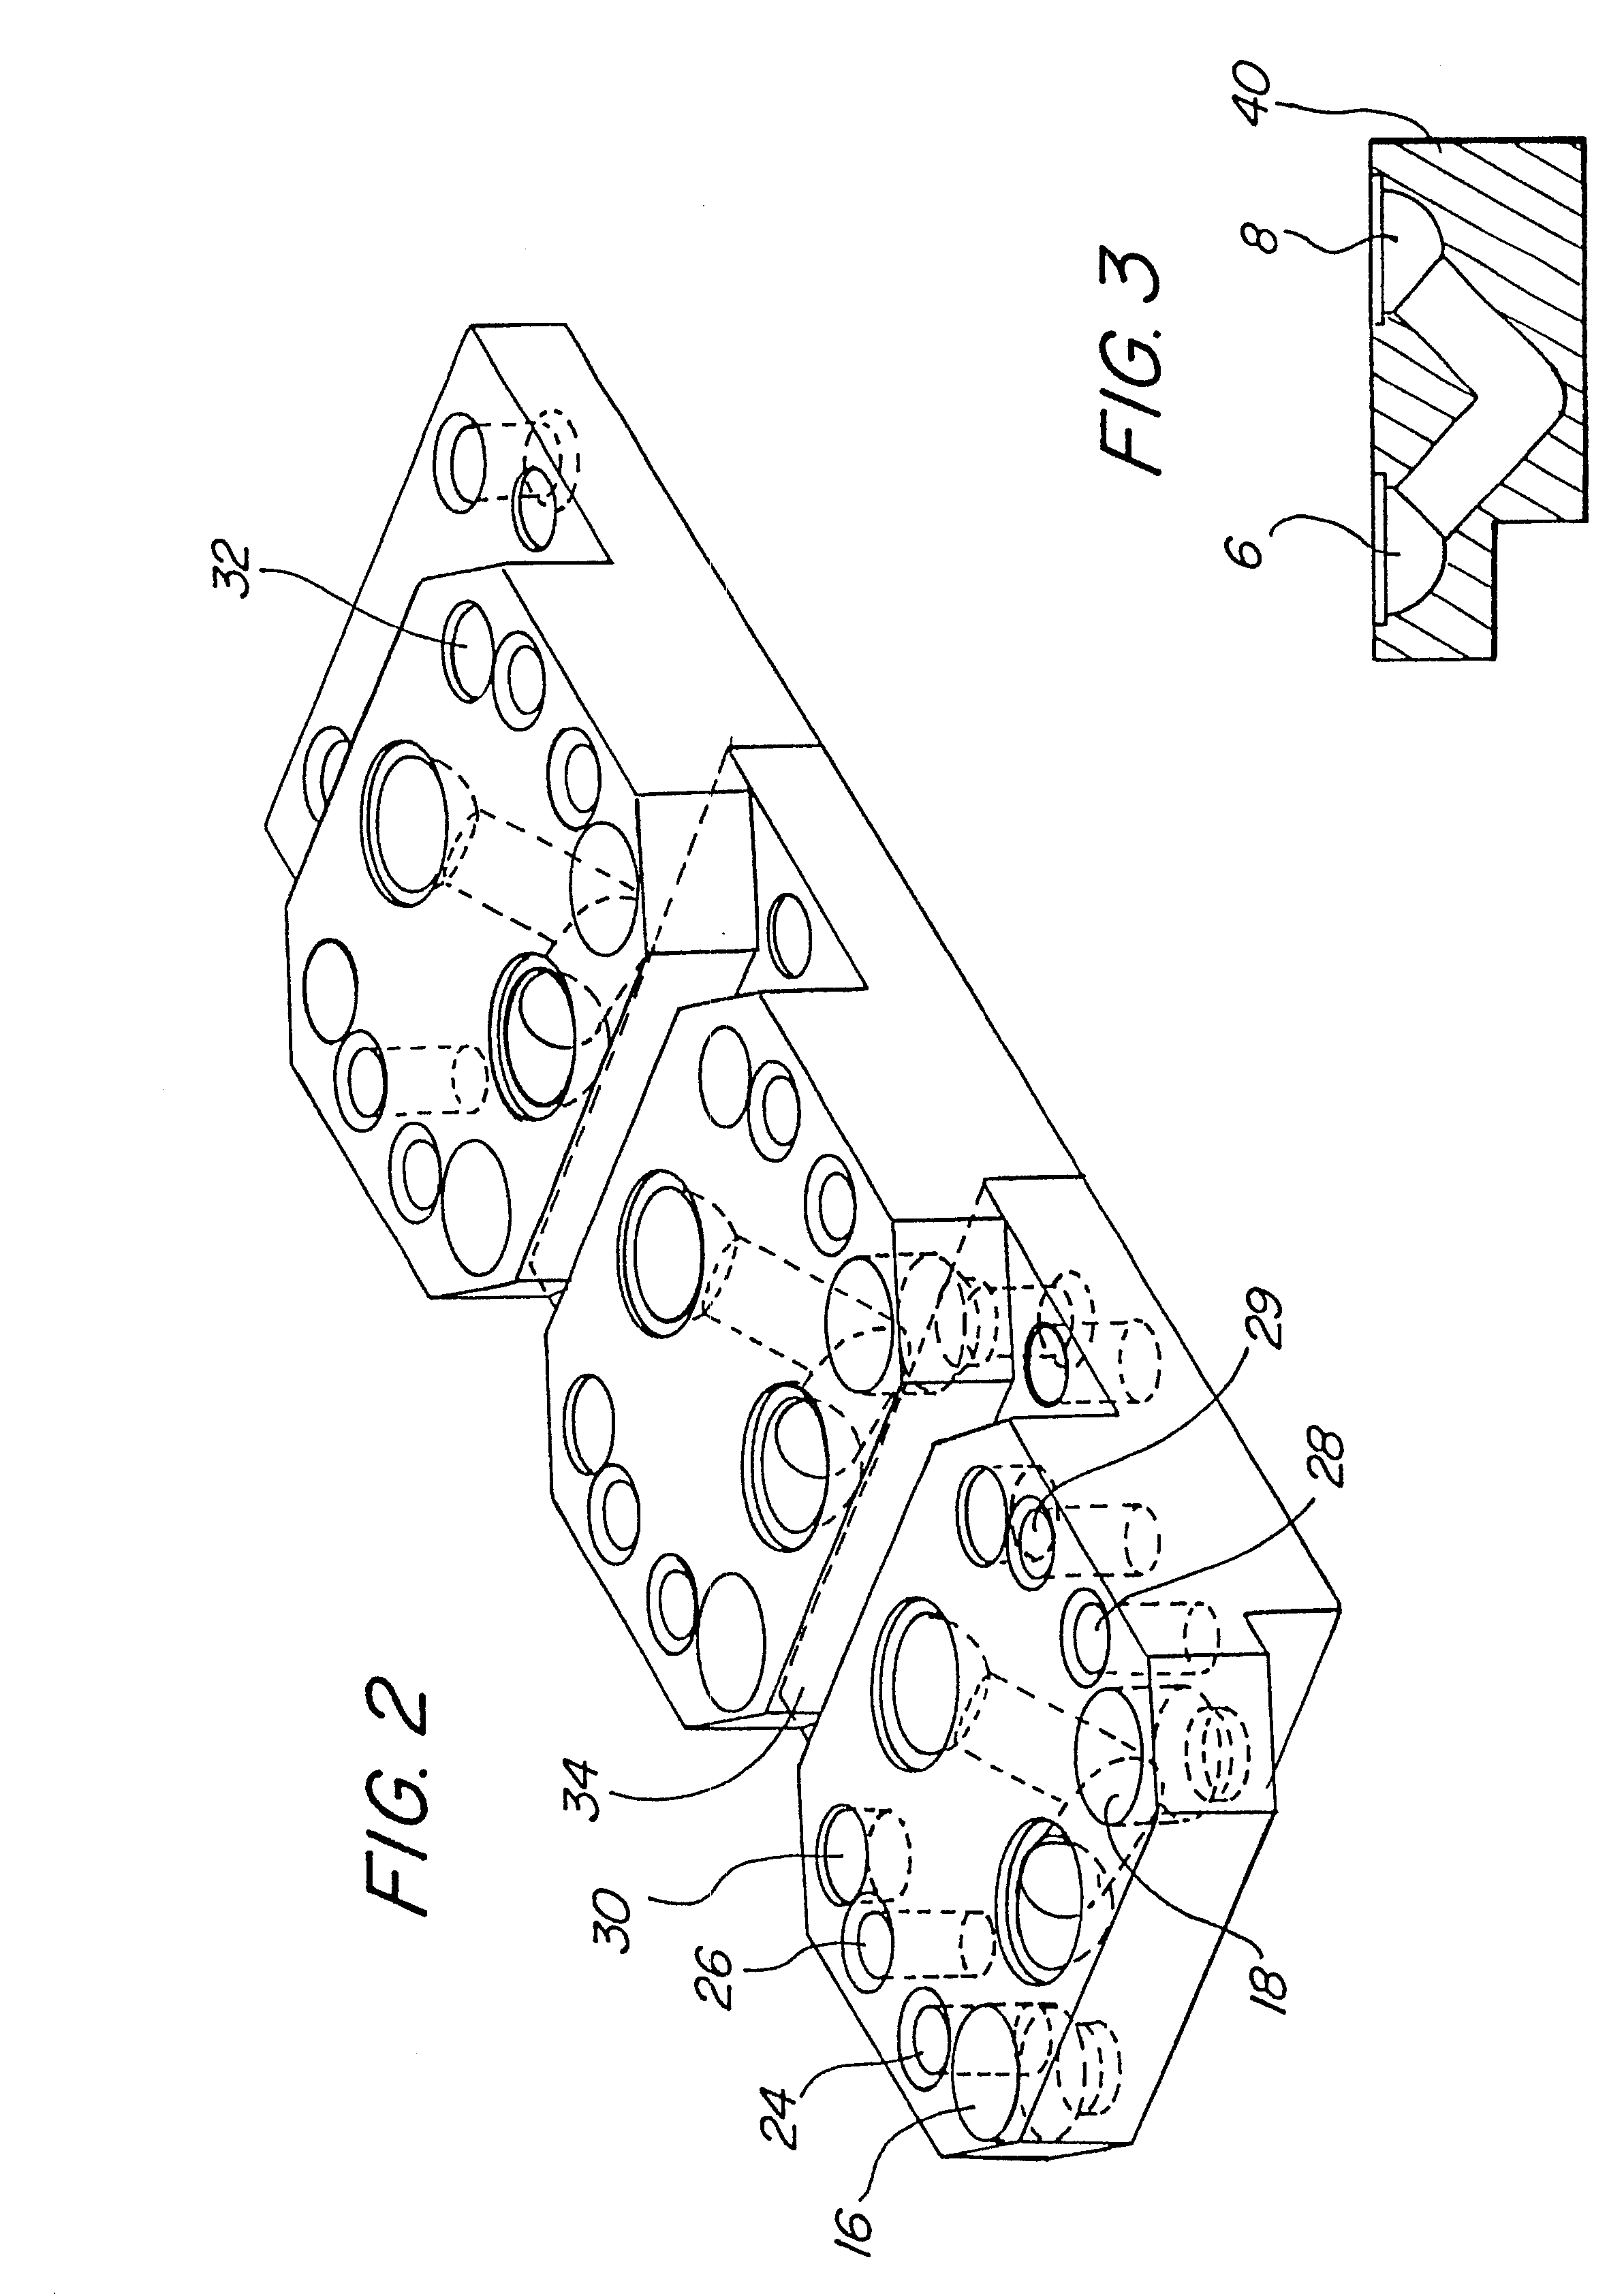 Manifold system of removable components for distribution of fluids